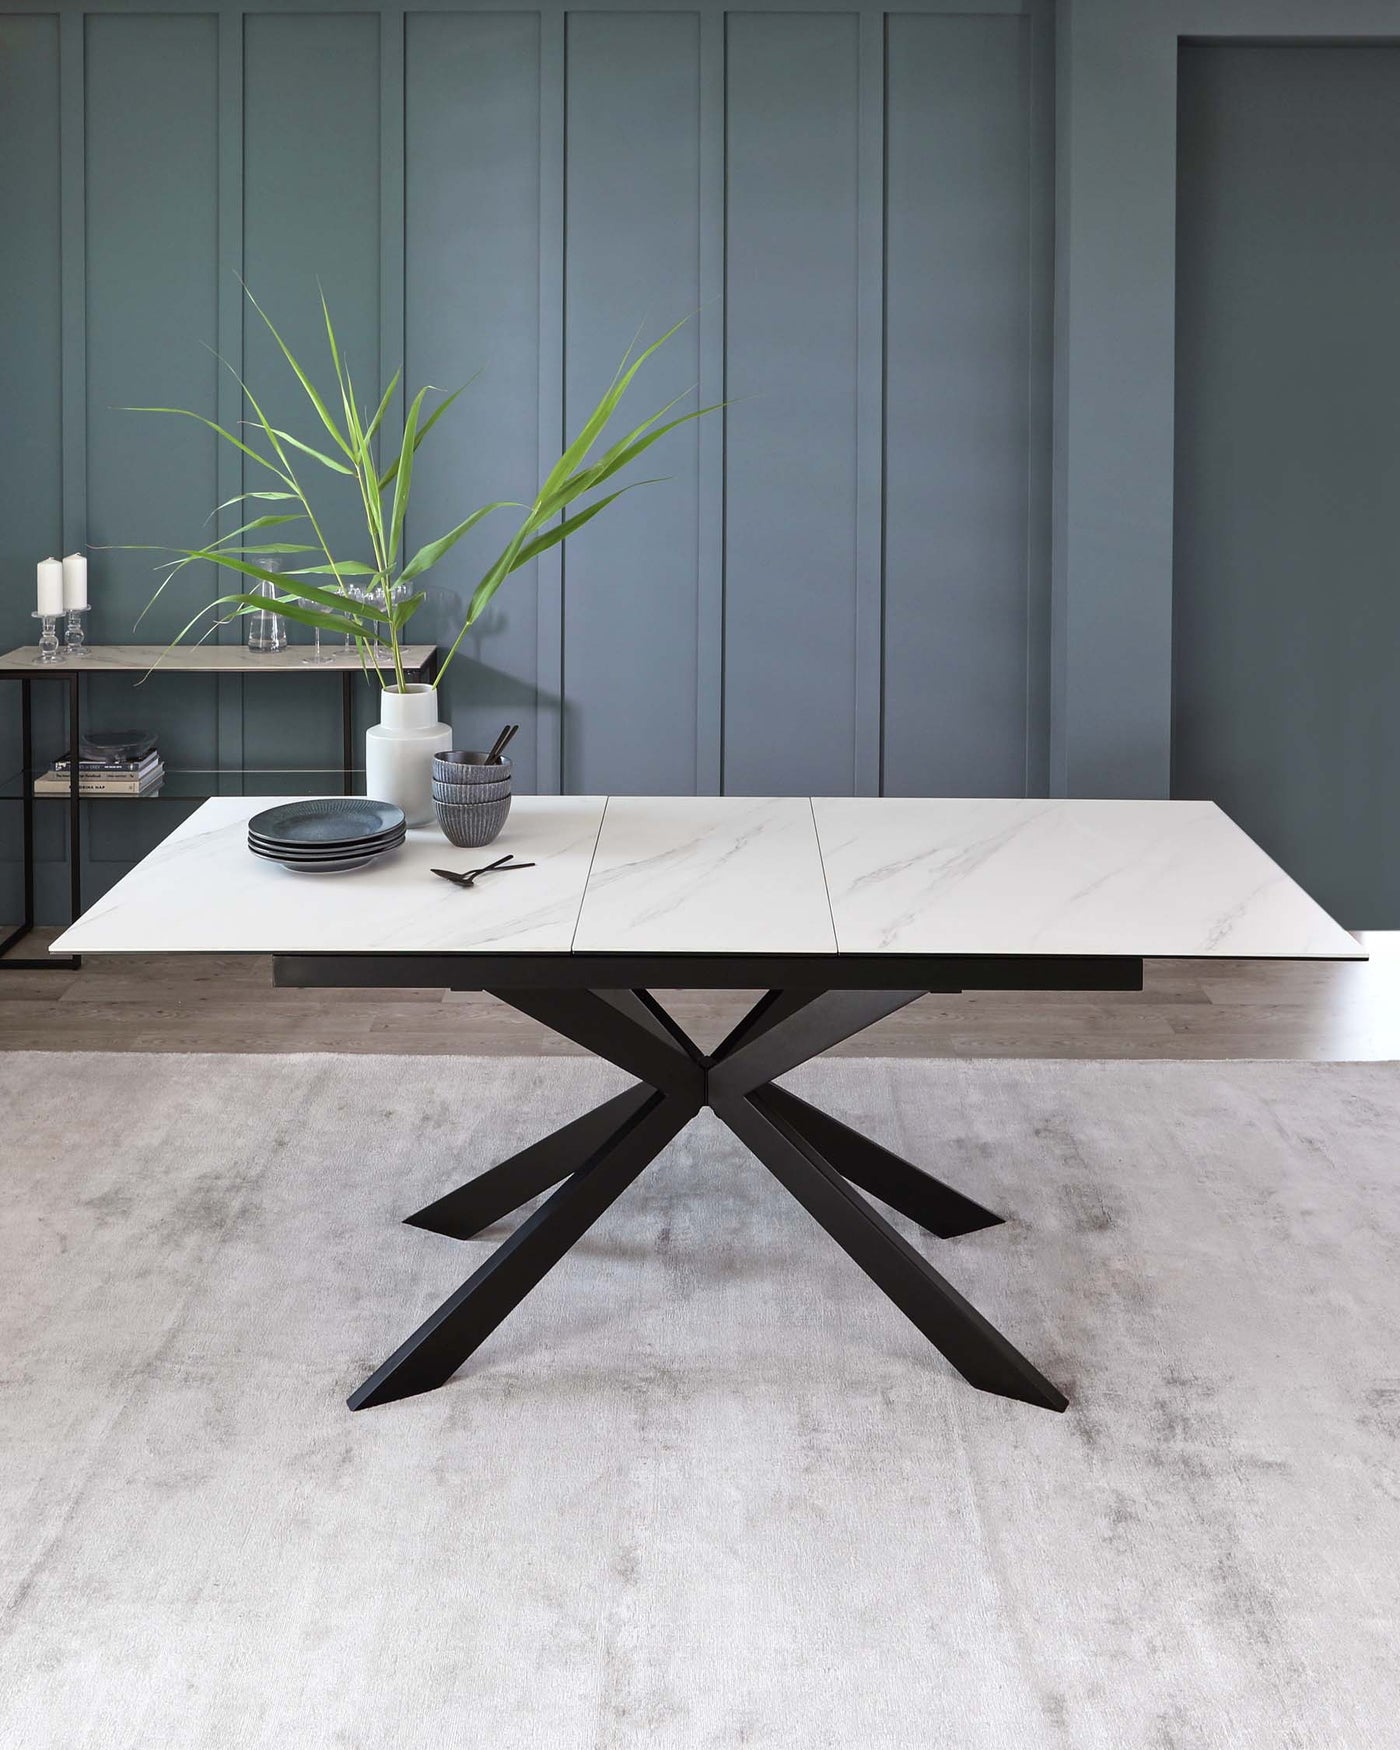 Modern rectangular dining table with a white marble tabletop and a bold black X-shaped metal base, accompanied by a minimalist metal shelf unit with decorative items against a muted teal wall.